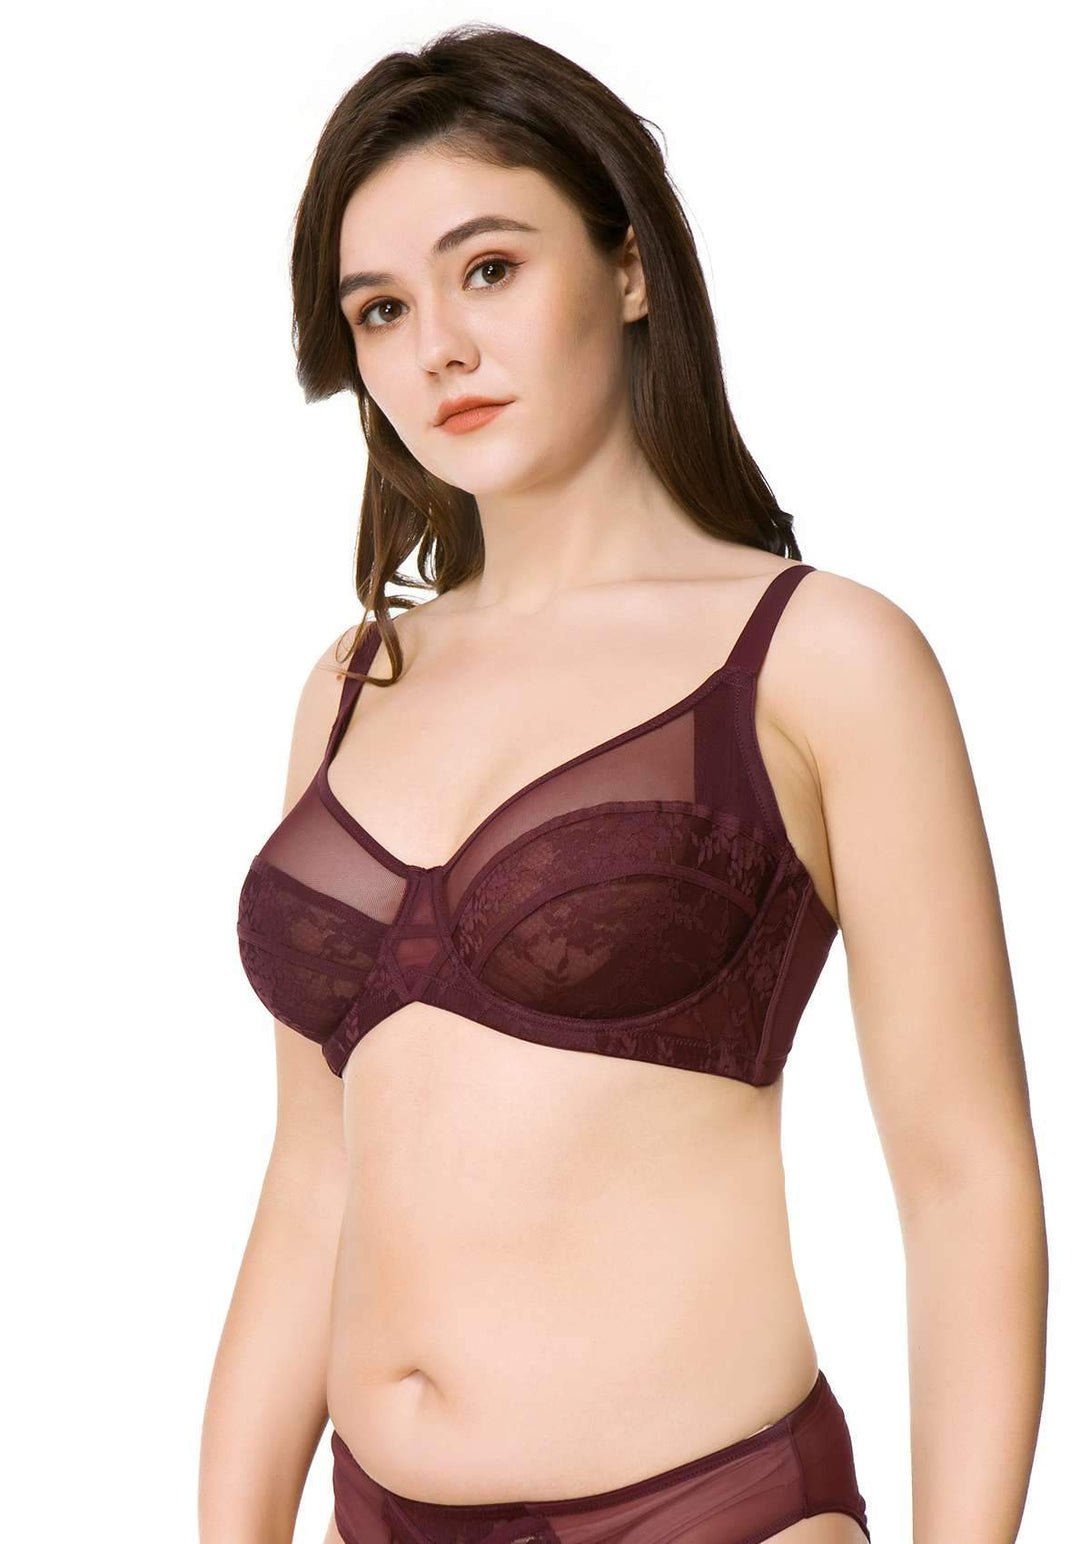 HSIA HSIA Sheer Lace Unlined Bra